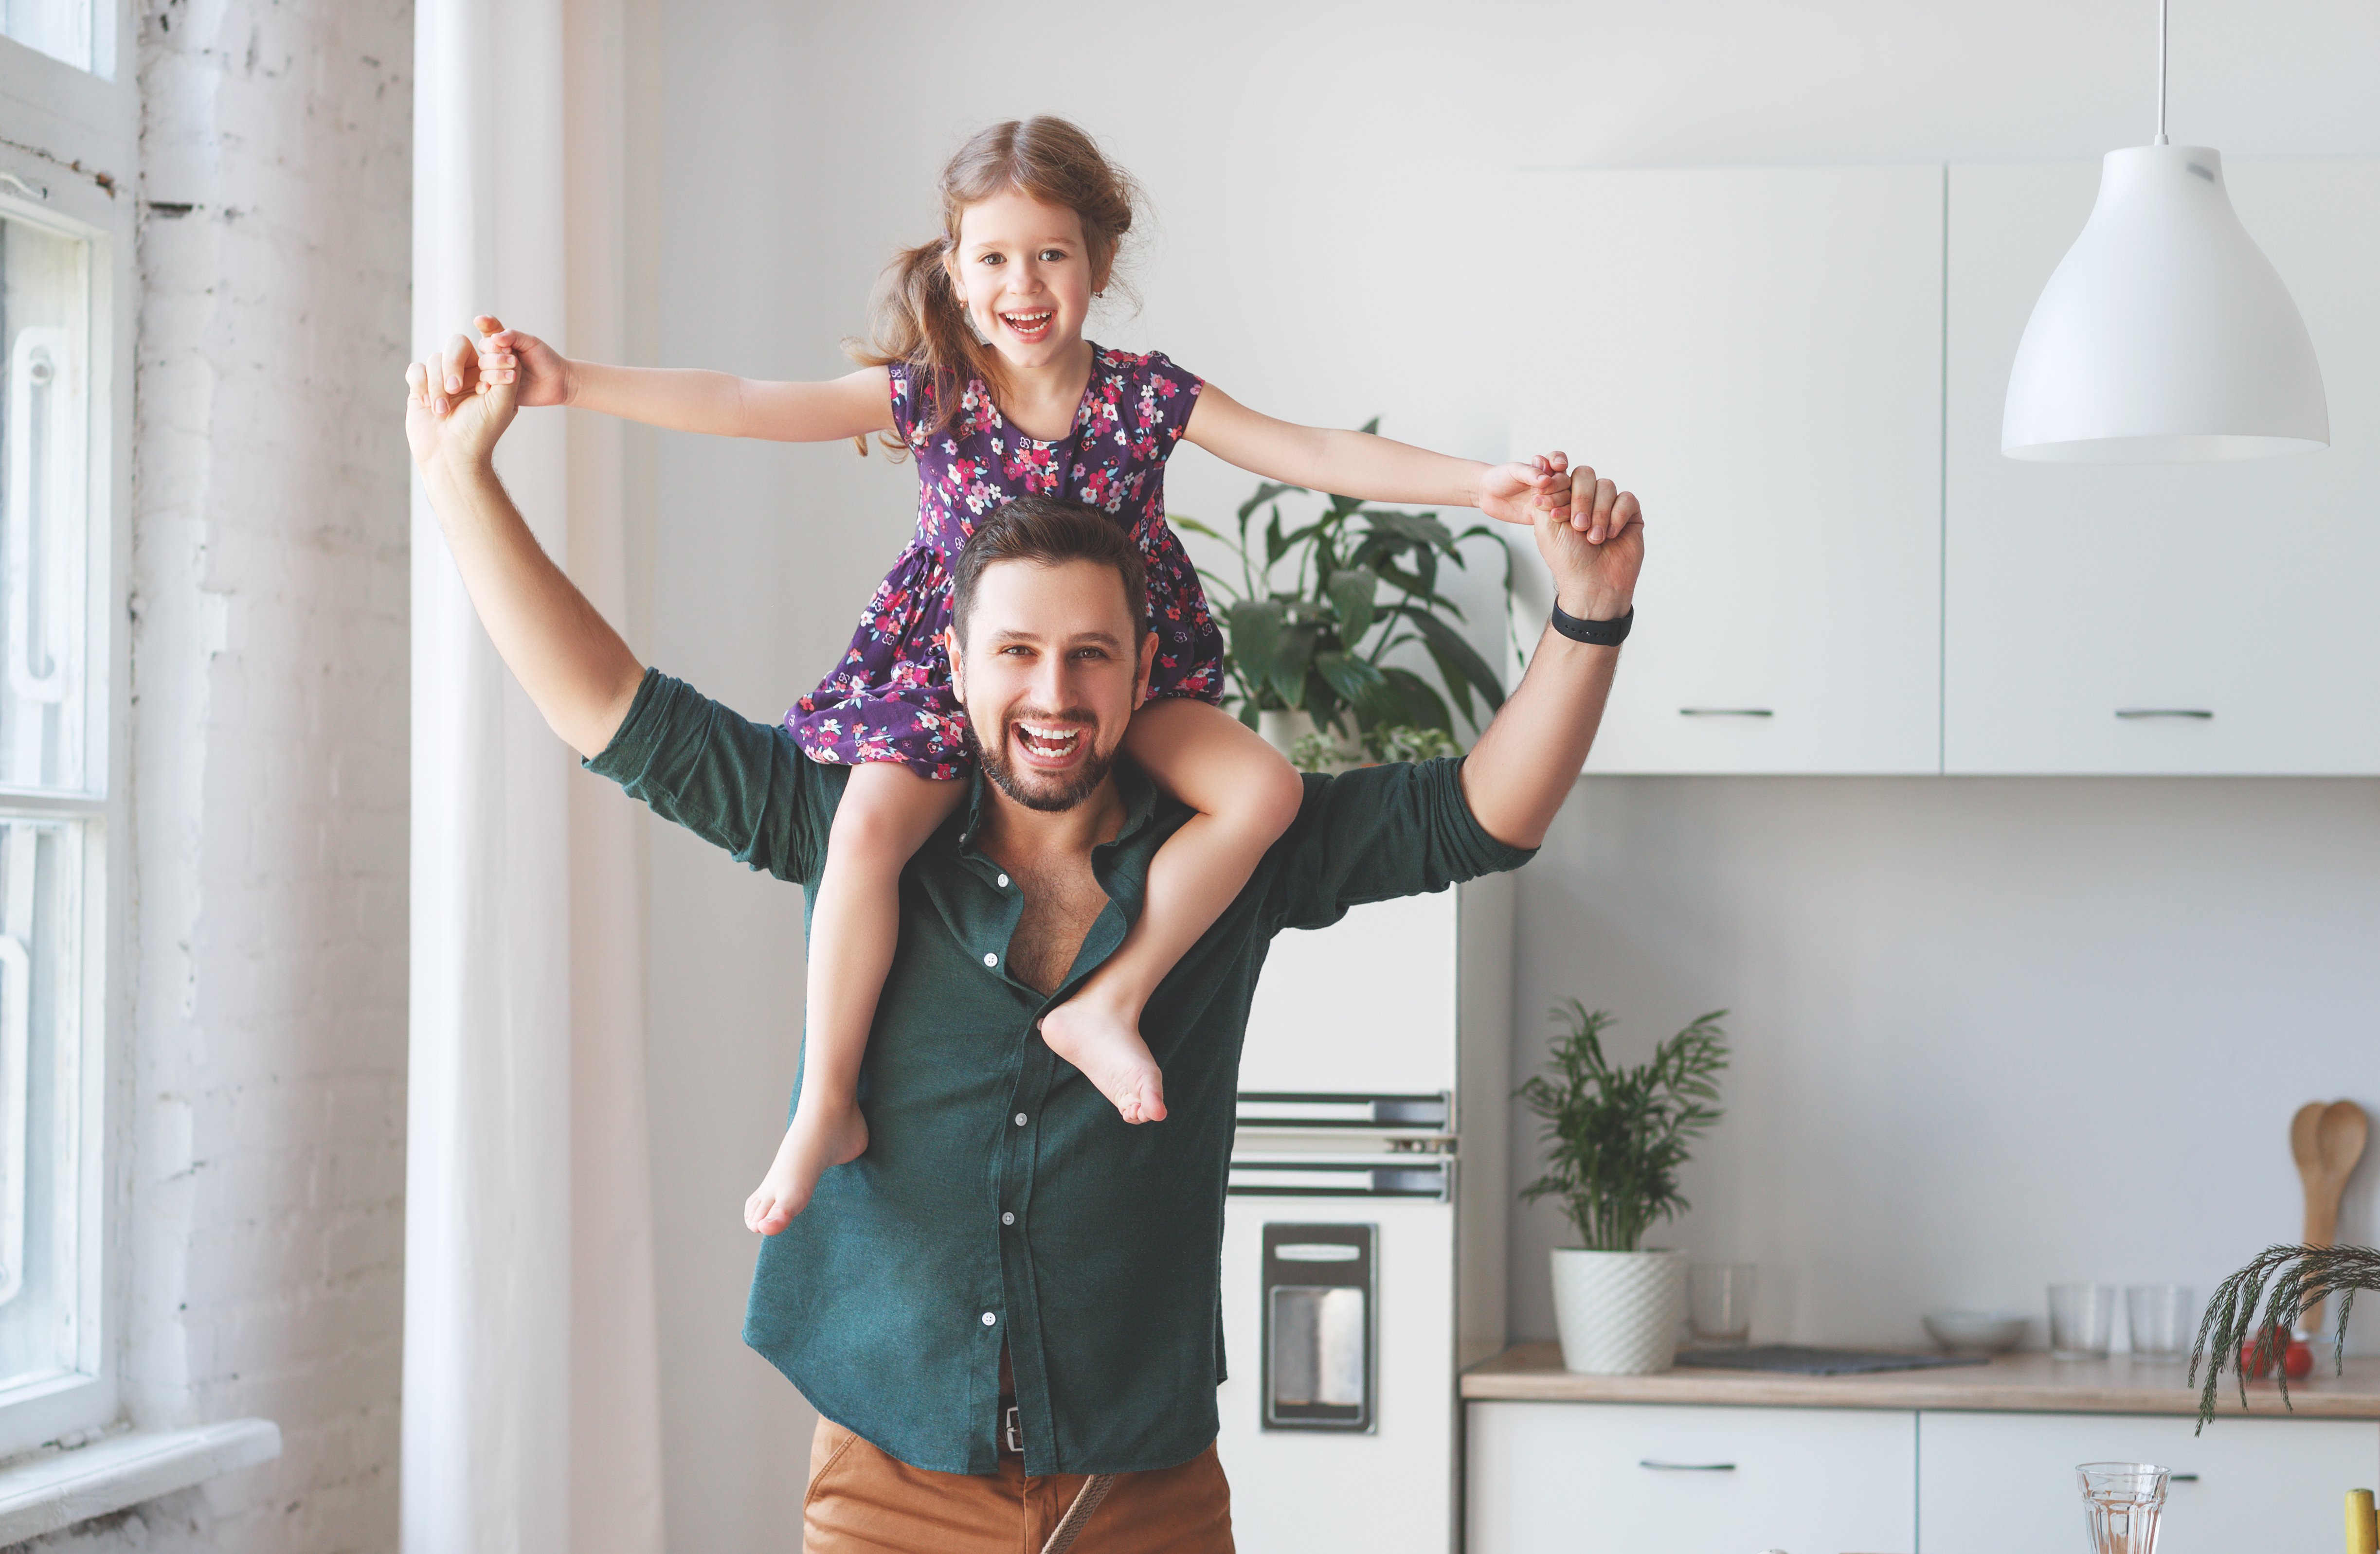 A father has his daughter on his shoulders. | Photo: Shutterstock